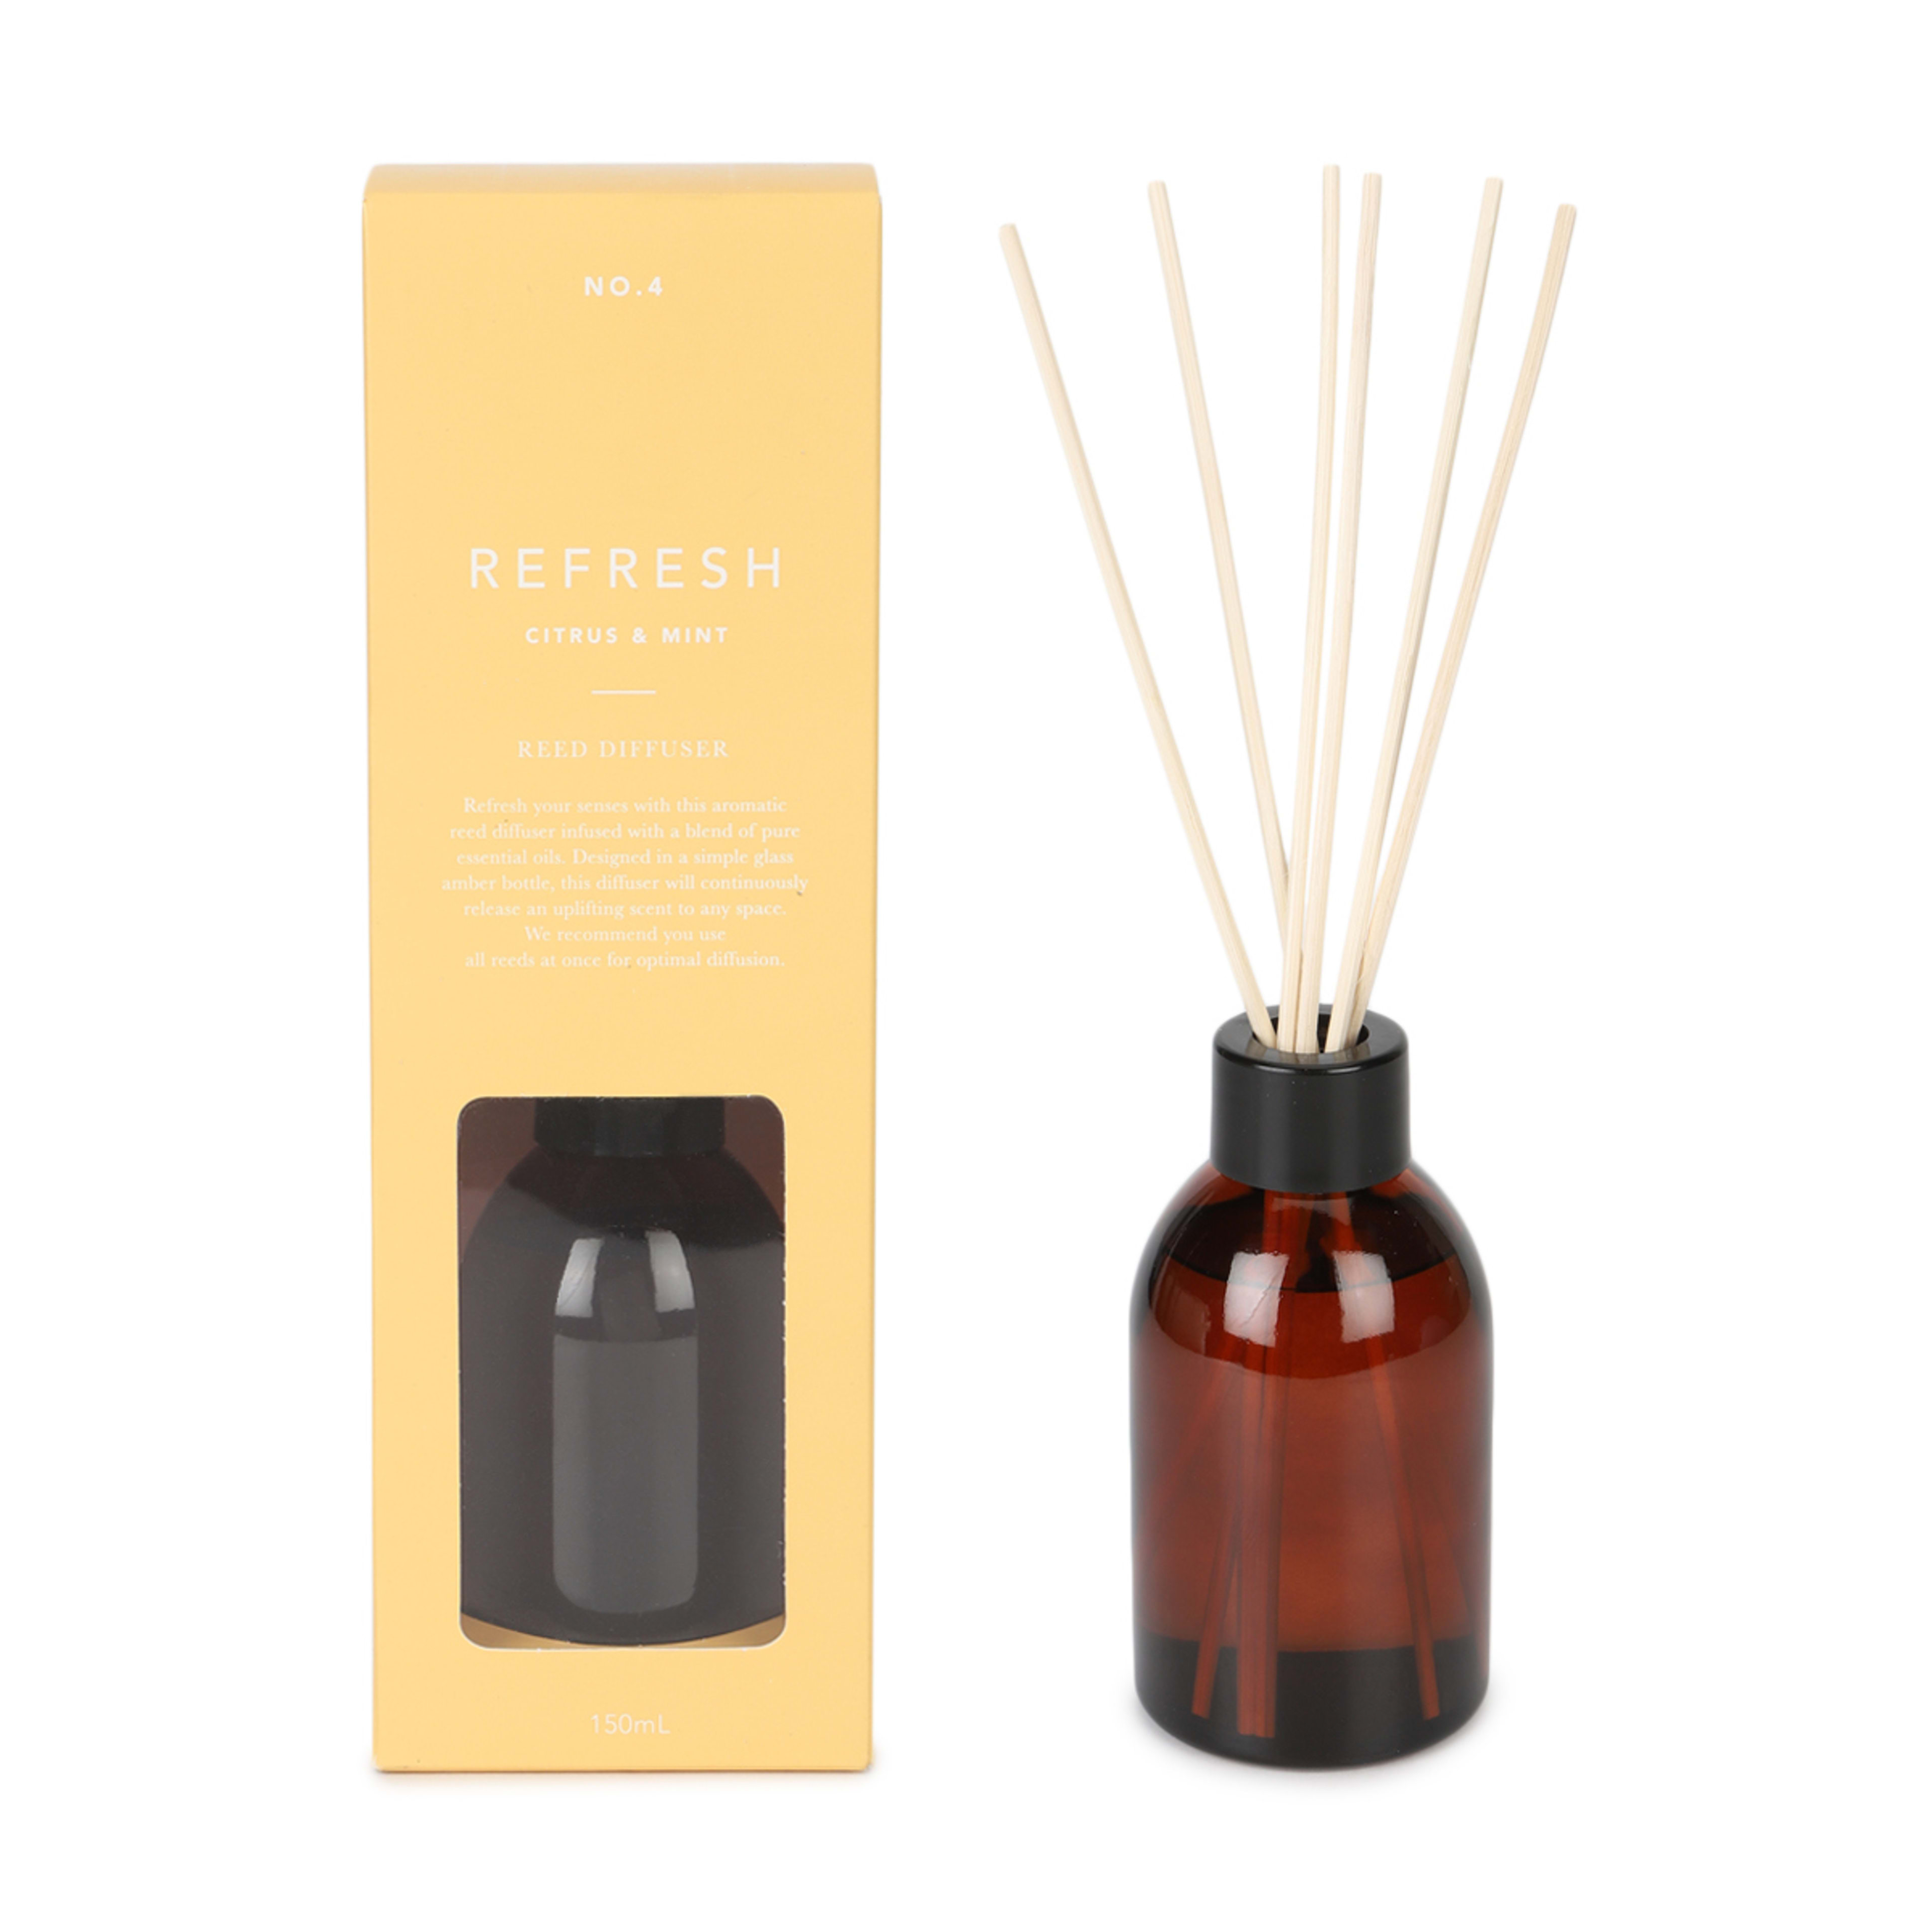 Citrus and Mint Refresh Reed Diffuser - Kmart